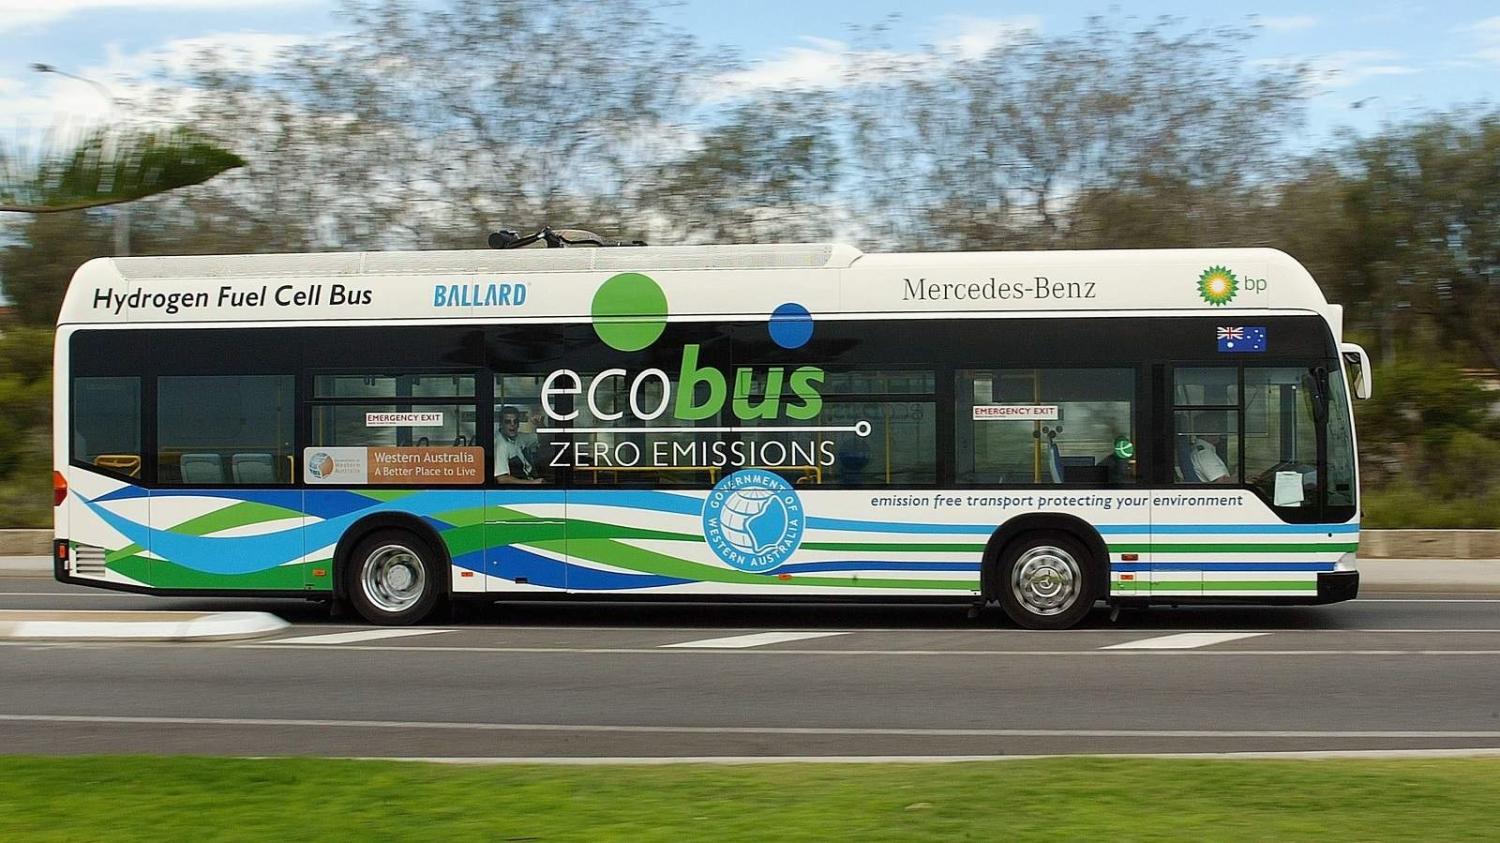 A Hydrogen Fuel Cell Bus on trial in Cottesloe, Western Australia (Paul Kane/Getty Images)